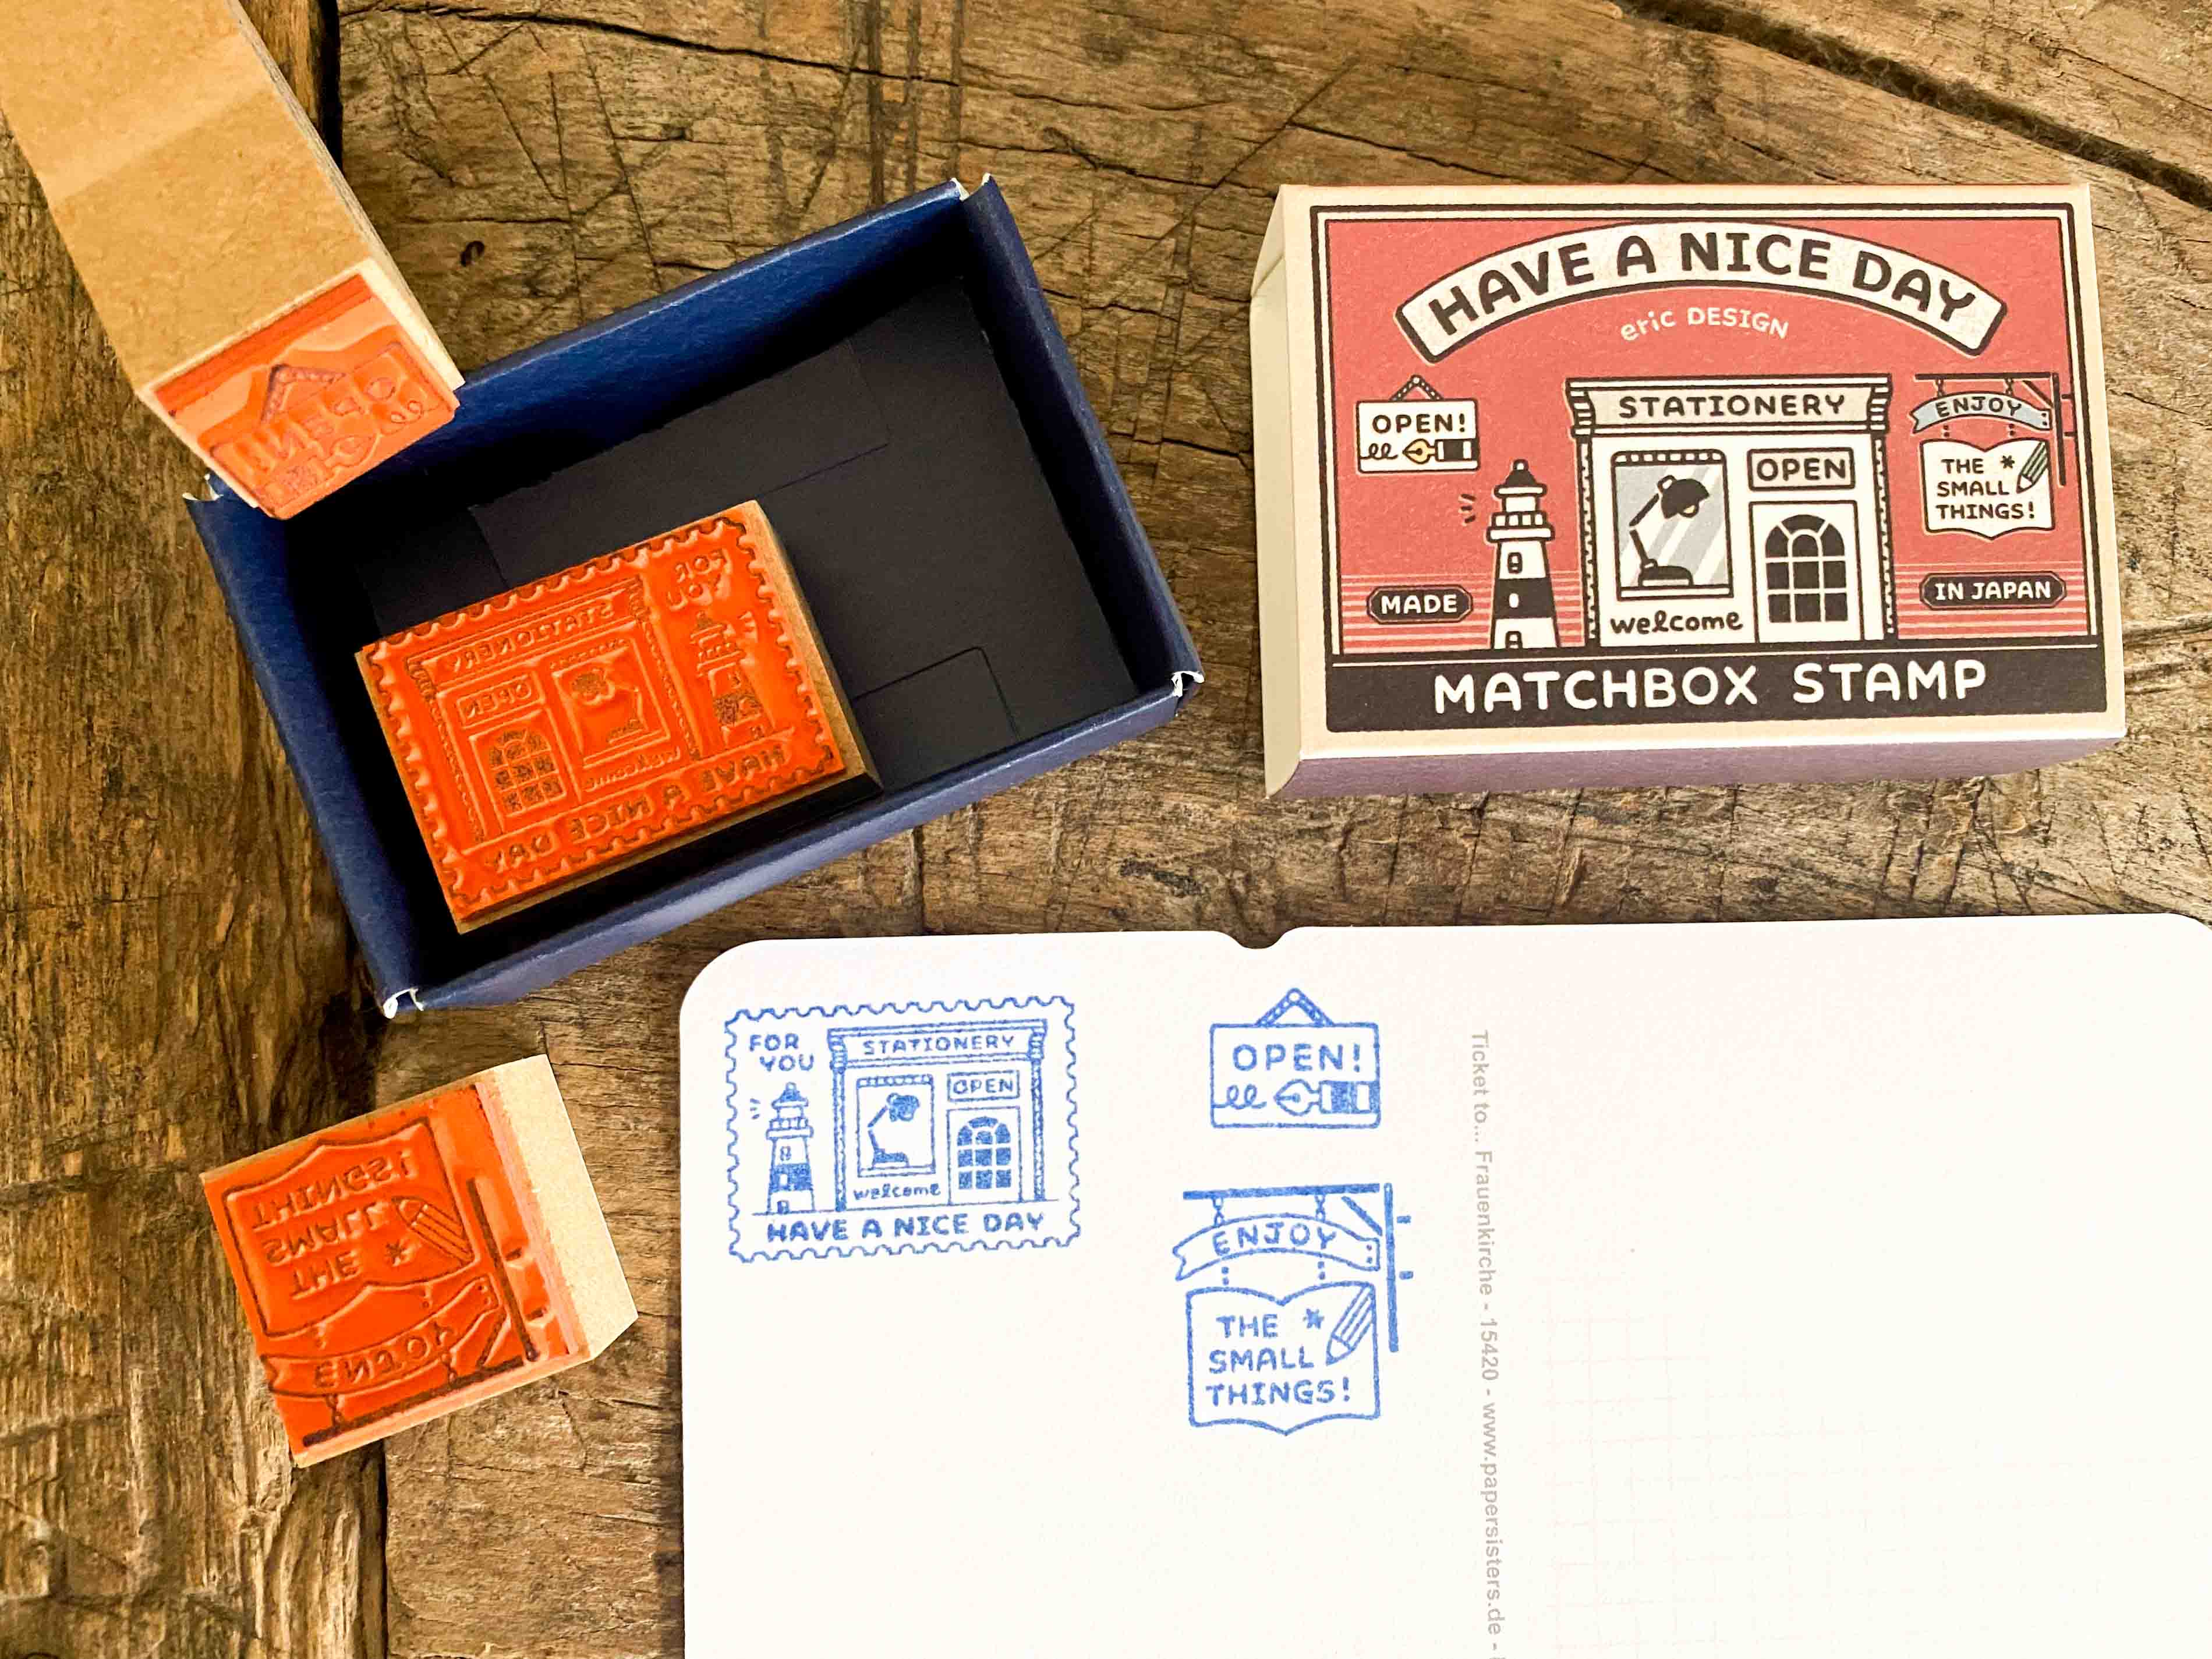 Stempeltrio "Stationery Store" Matchbox Stamps